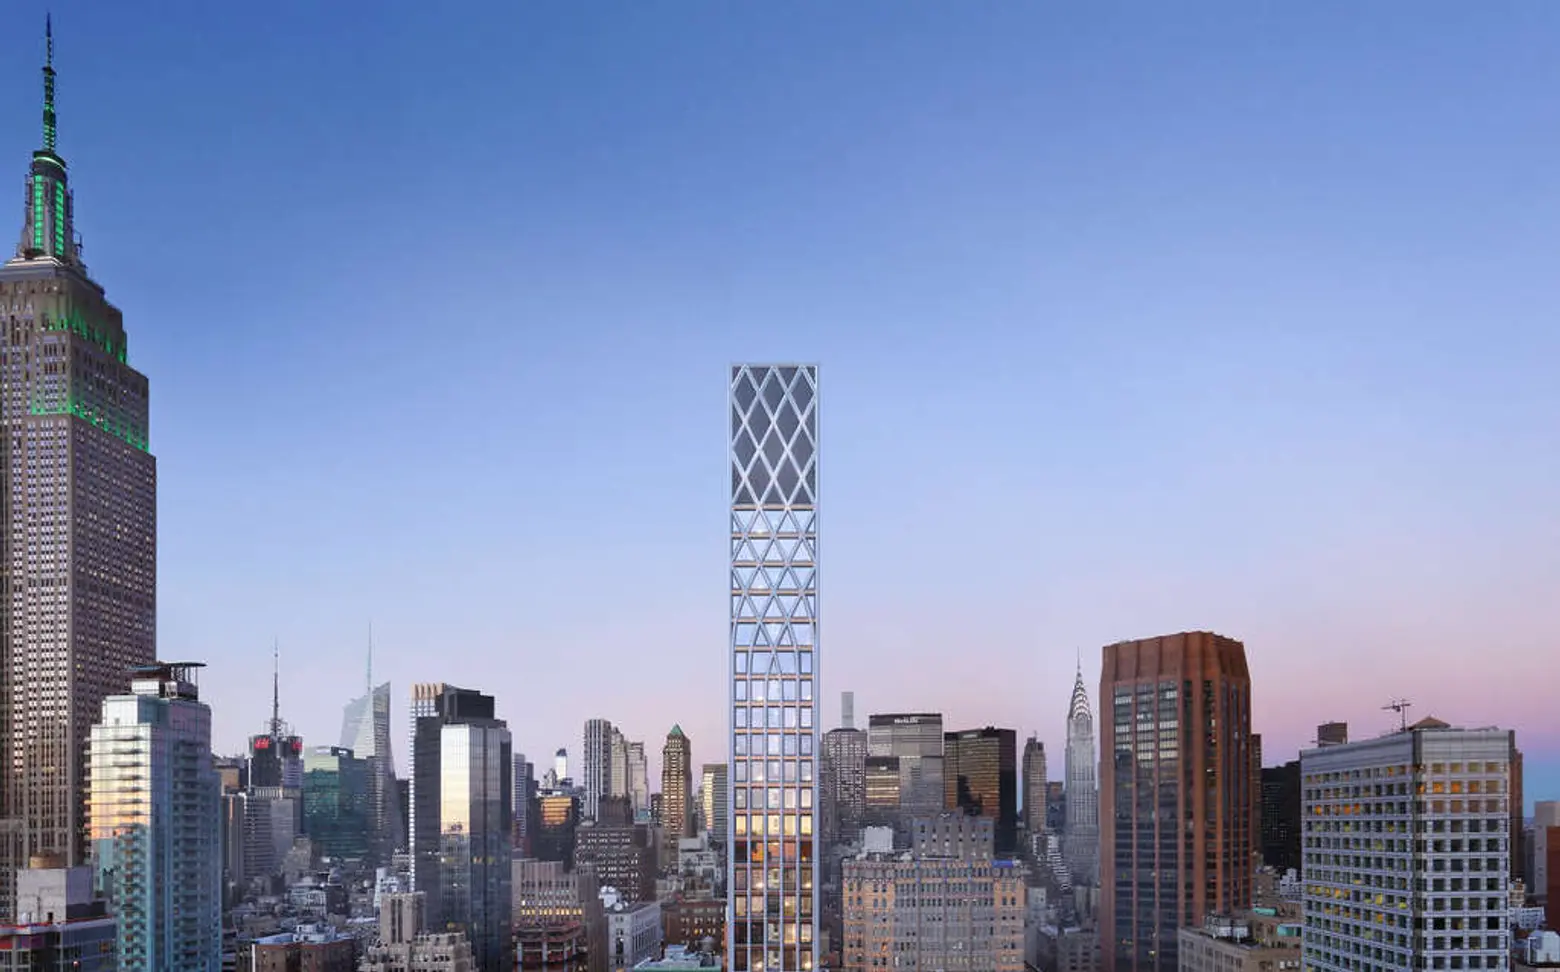 REVEALED: Morris Adjmi’s Gothic-inspired condo tower coming to Nomad